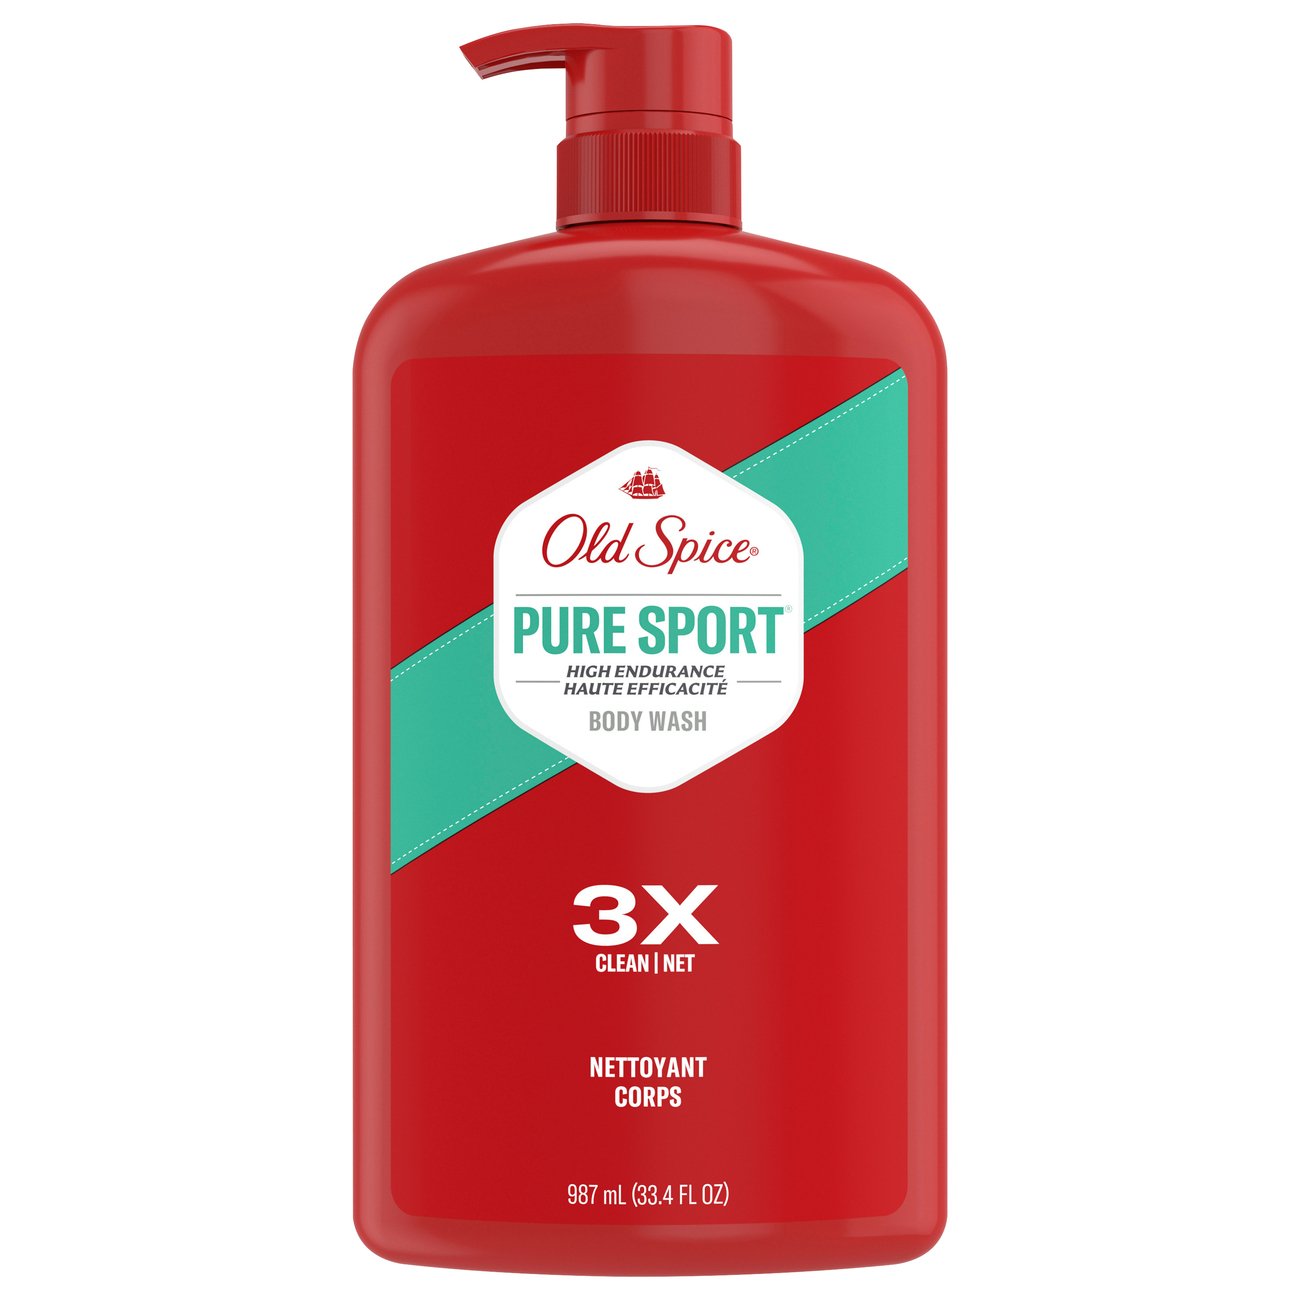 Old Spice Men's Body Wash Revitalizing with Charcoal, All Skin